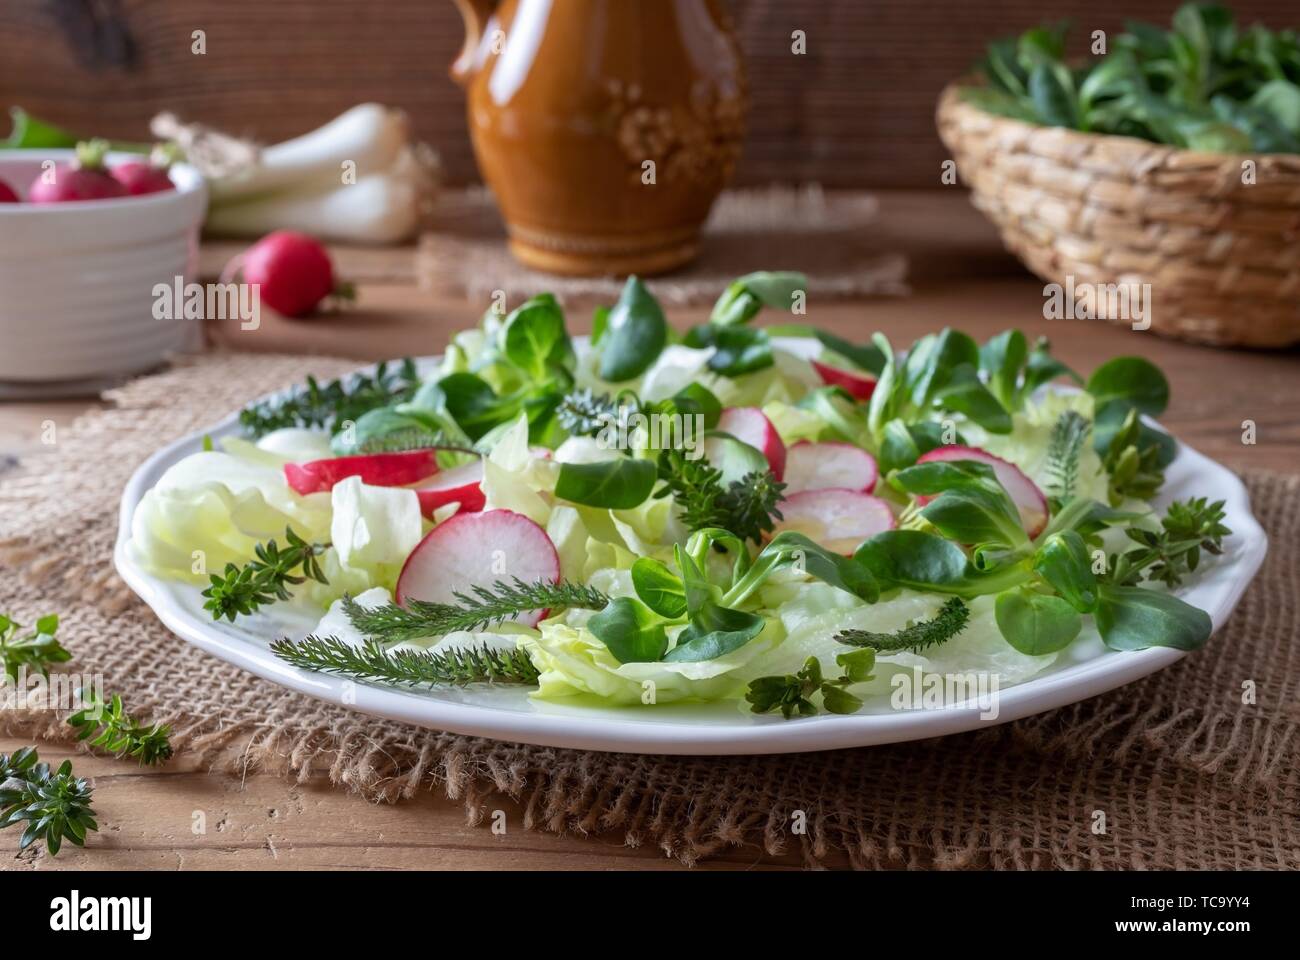 Spring salad with wild edible plants - chickweed, bedstraw and young yarrow leaves. Stock Photo